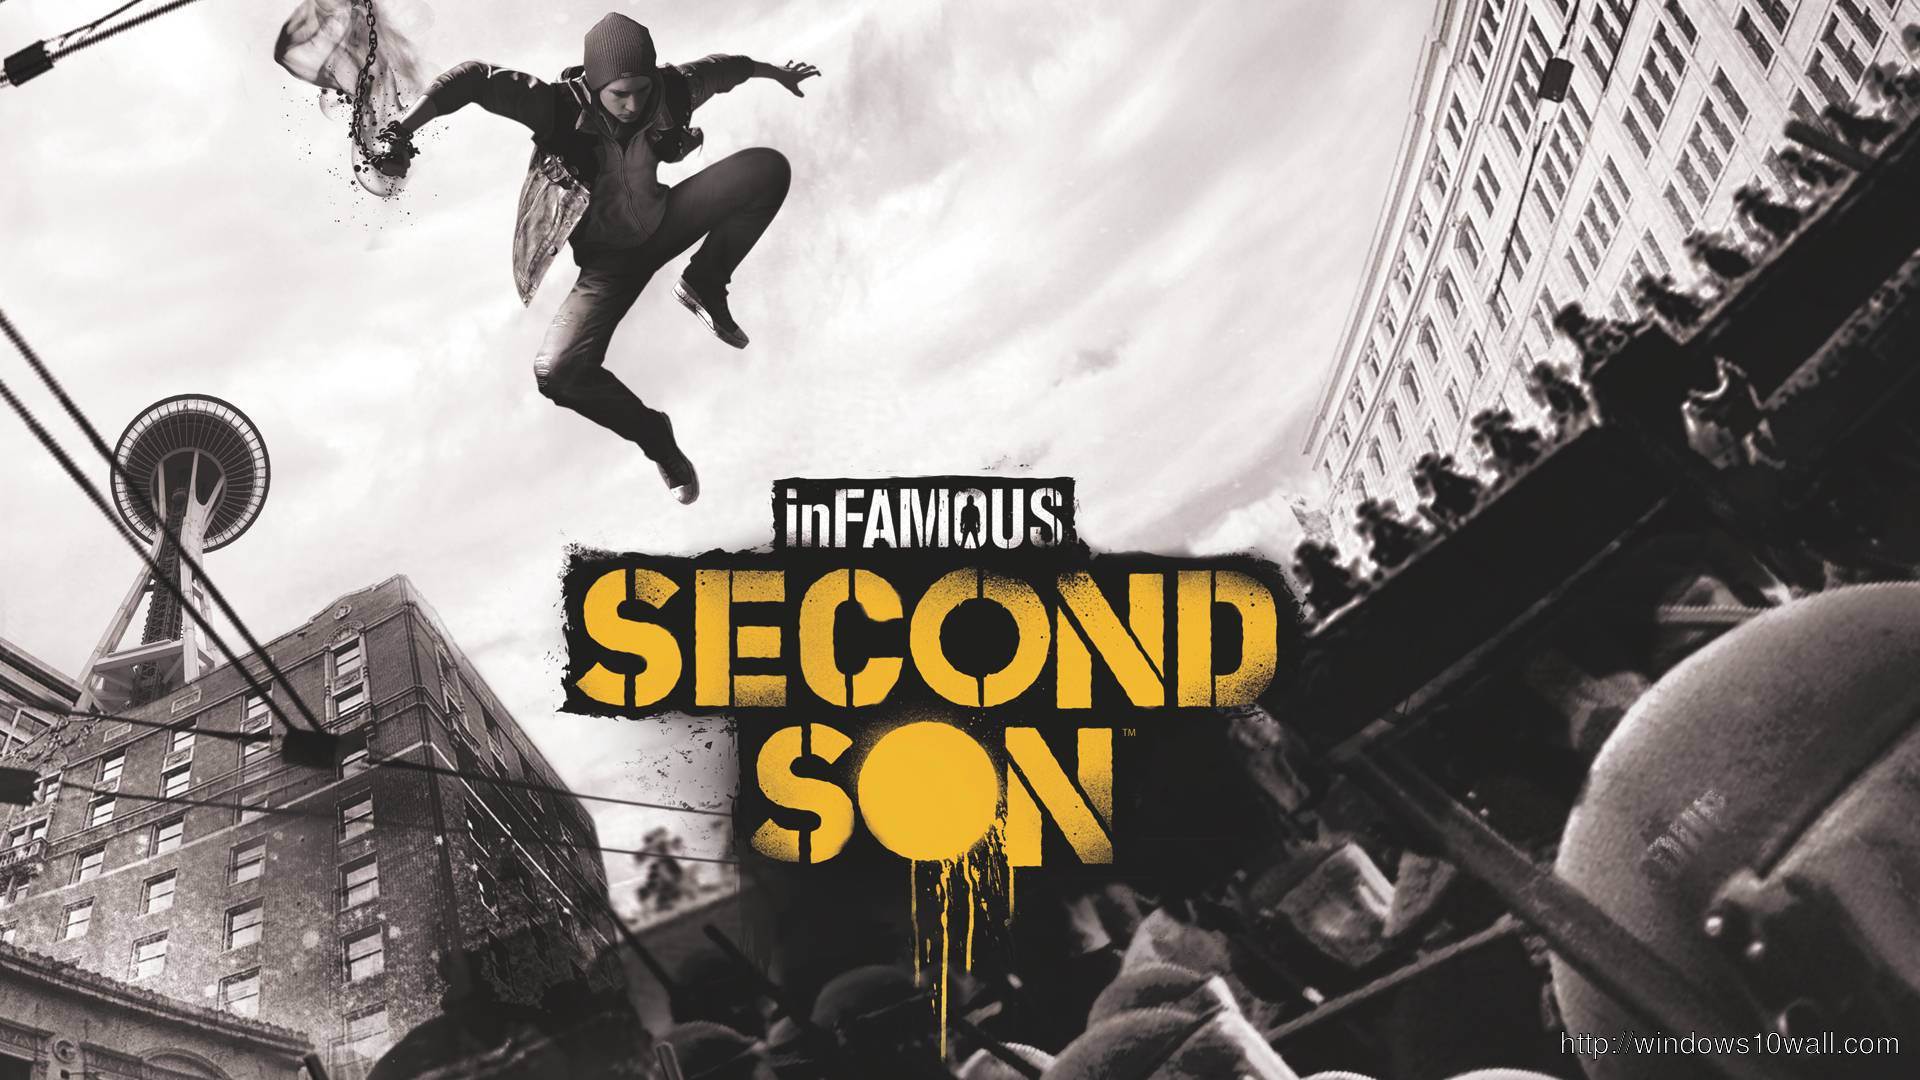 Infamous: Second Son – First In-Game PlayStation 4 wallpaper